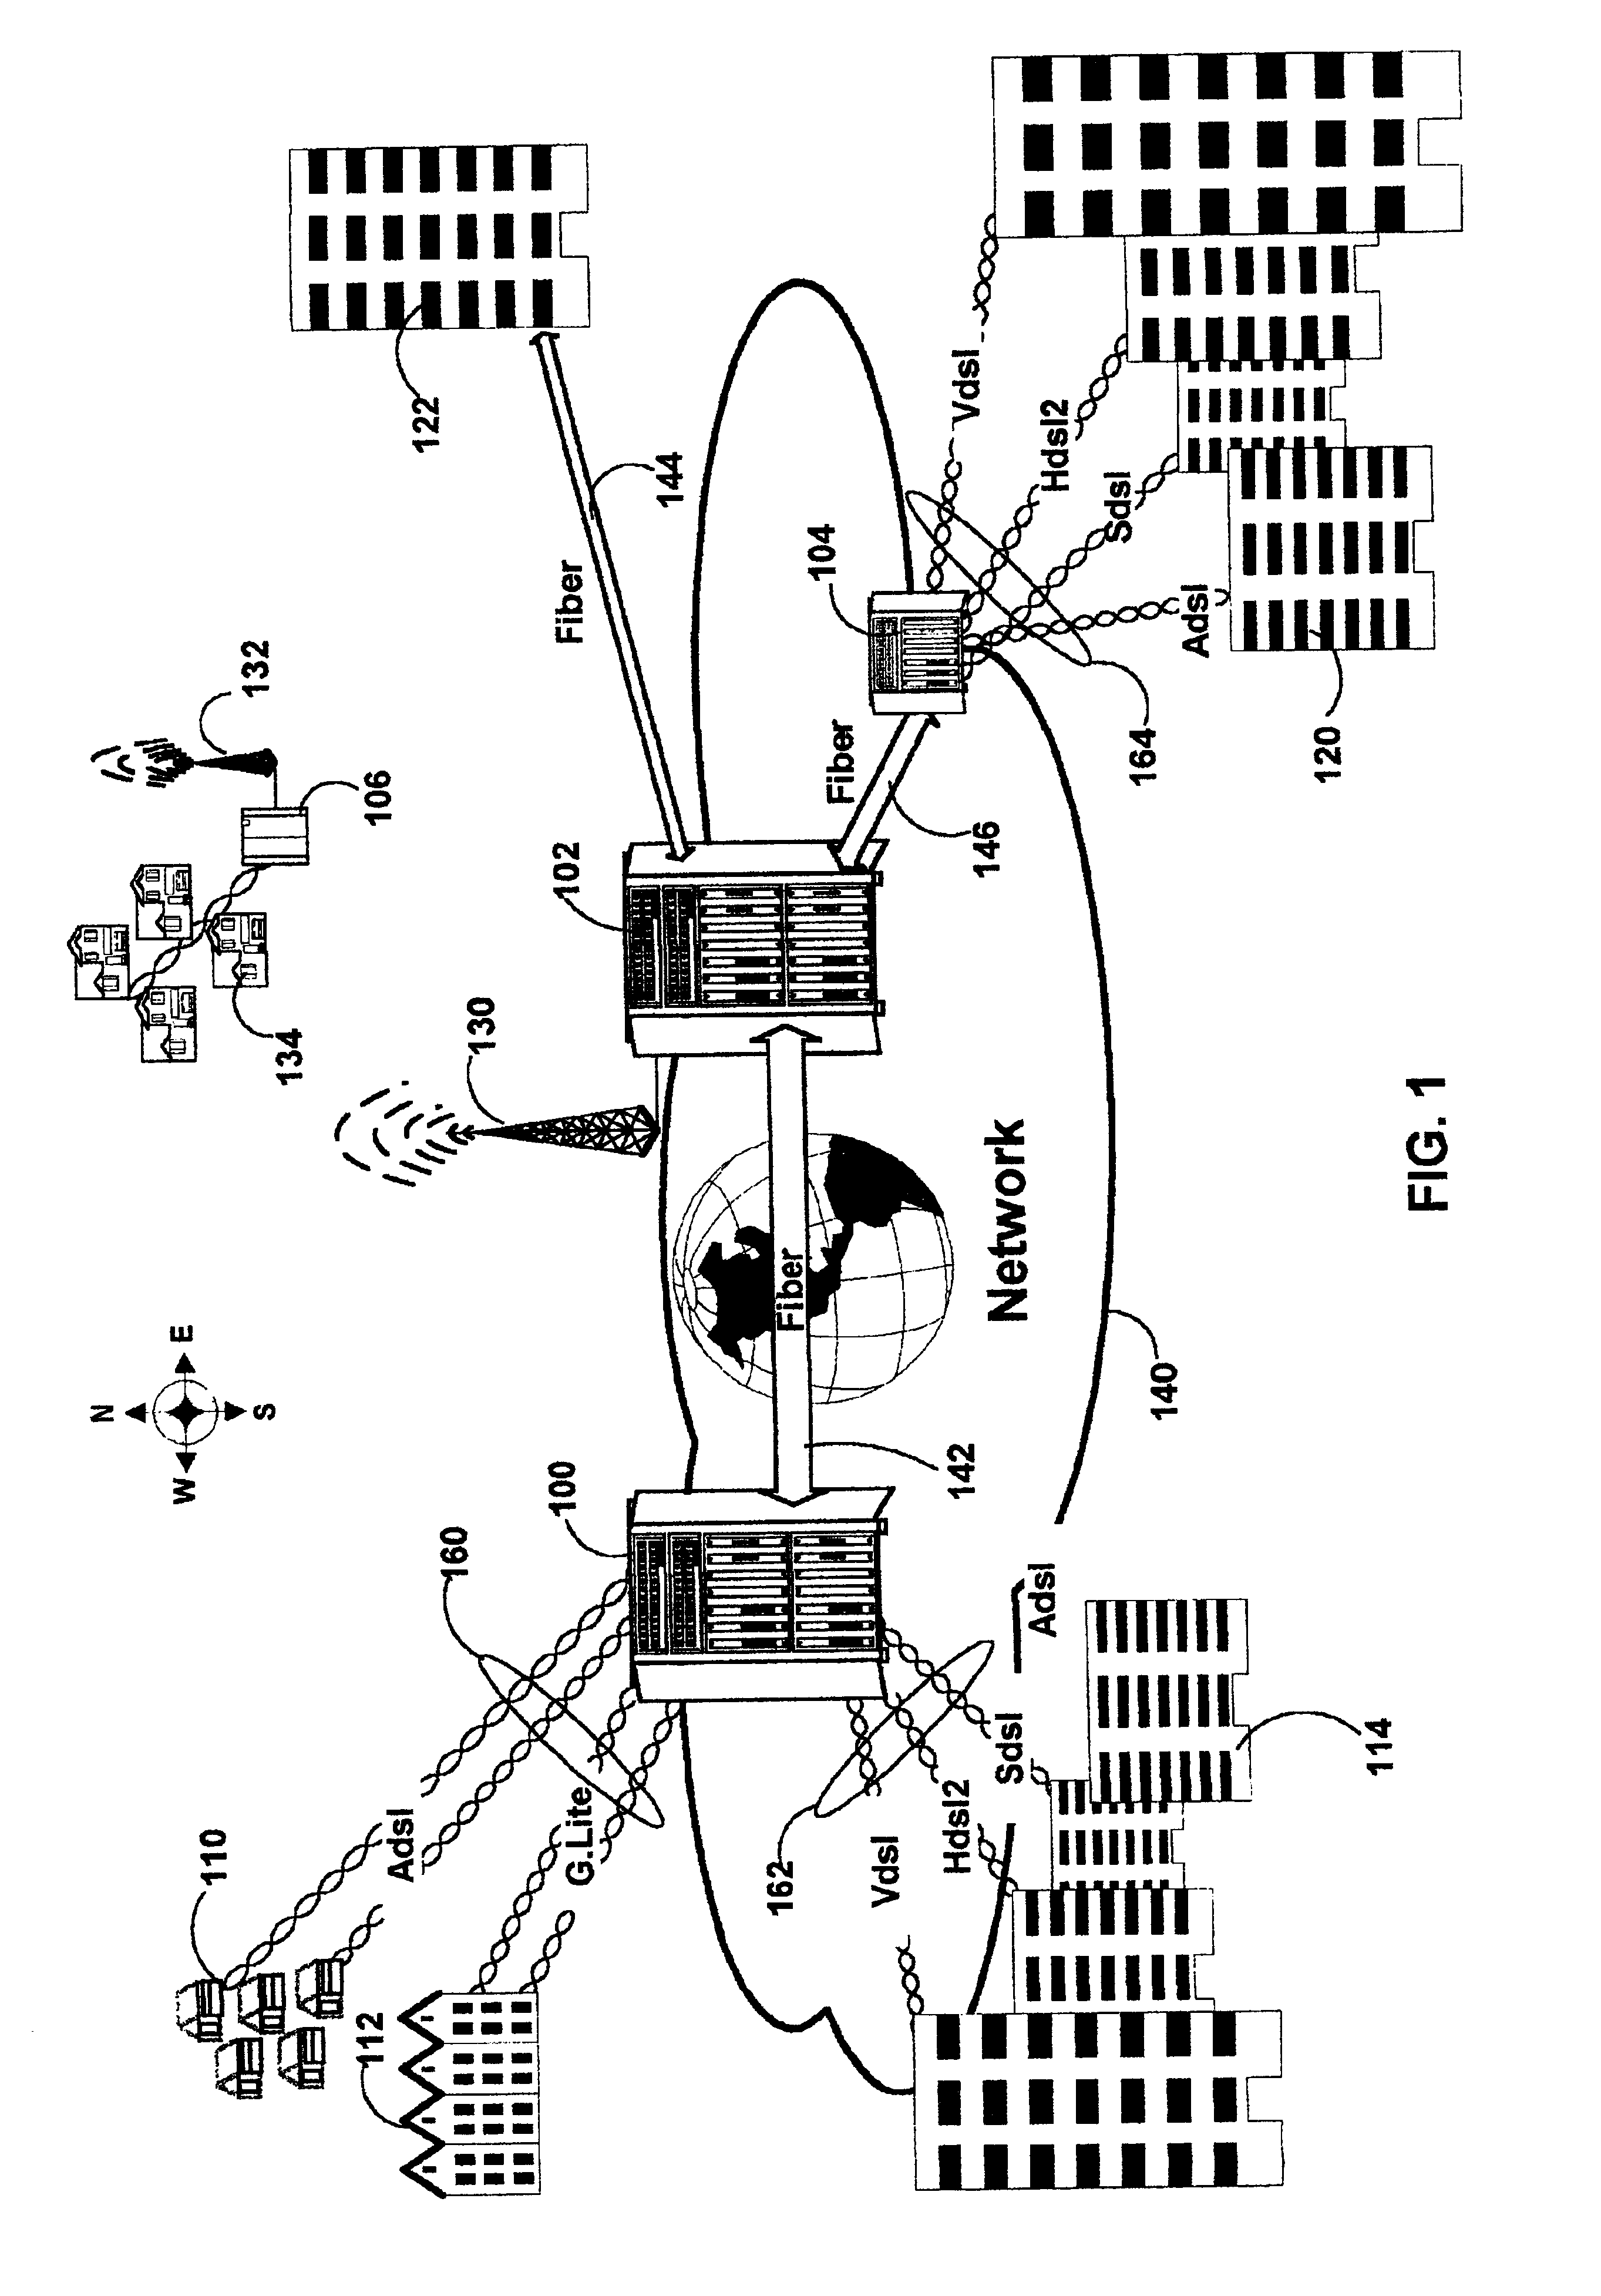 Method and apparatus for a X-DSL communication processor